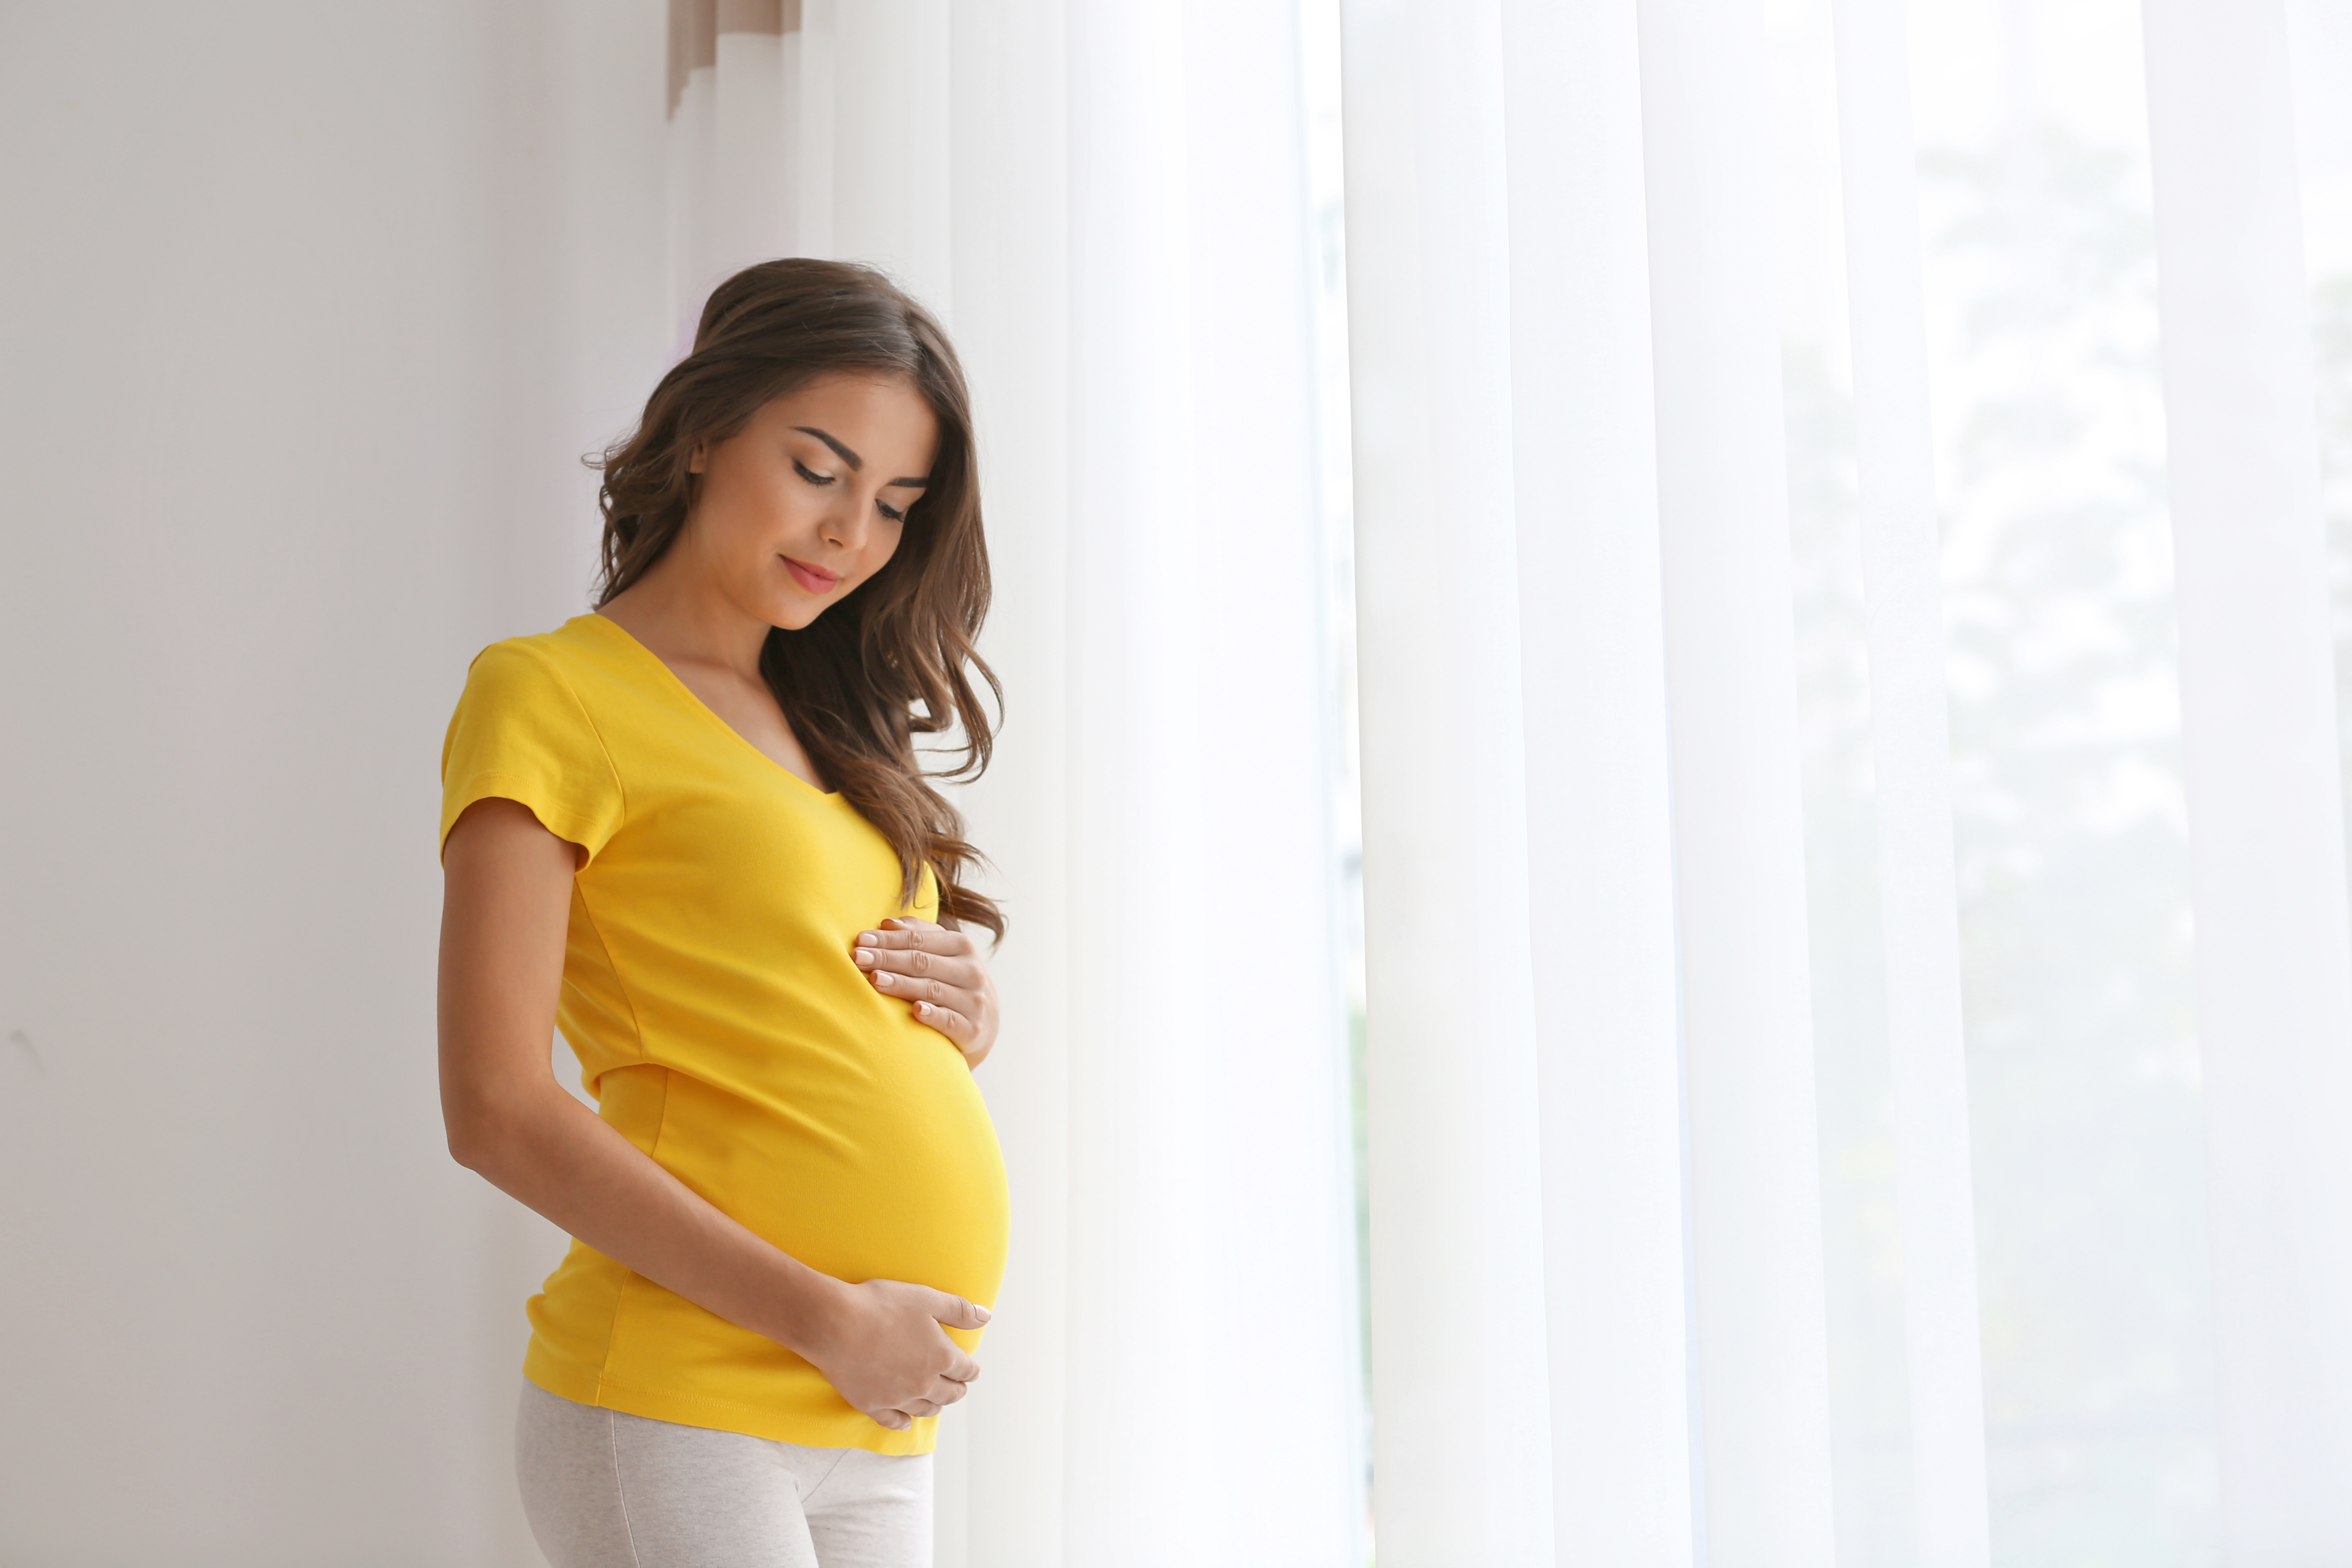 A pregnant woman standing by a window | Source: Shutterstock